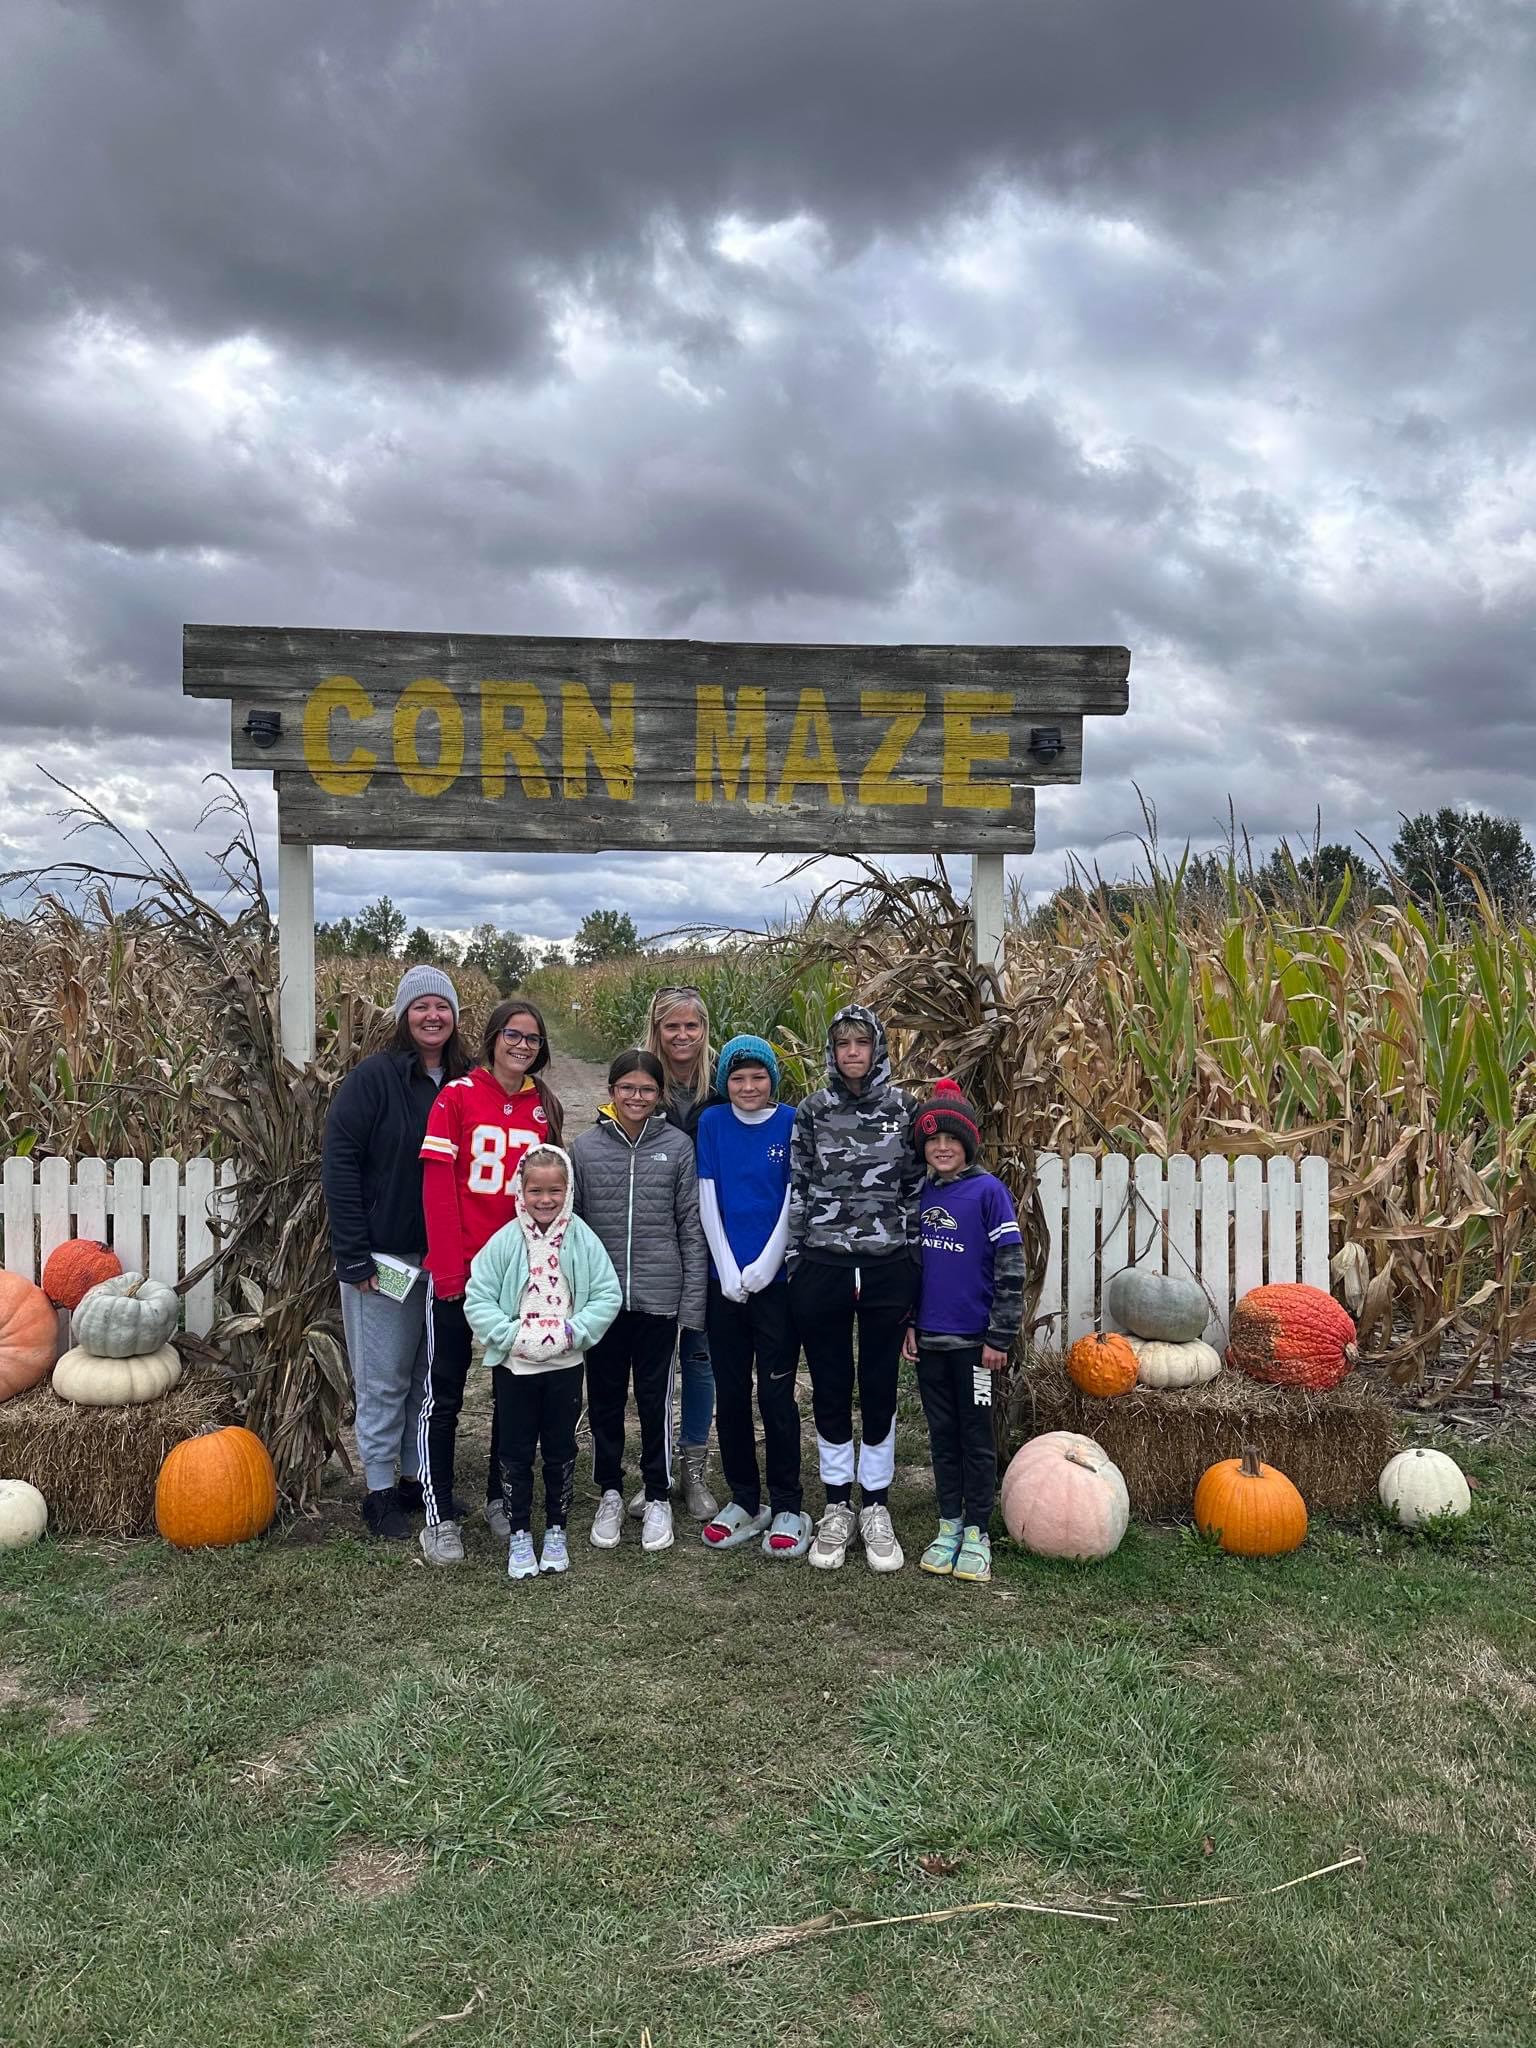 Family poses for a photo just before heading into the corn maze at the Weller Farm.